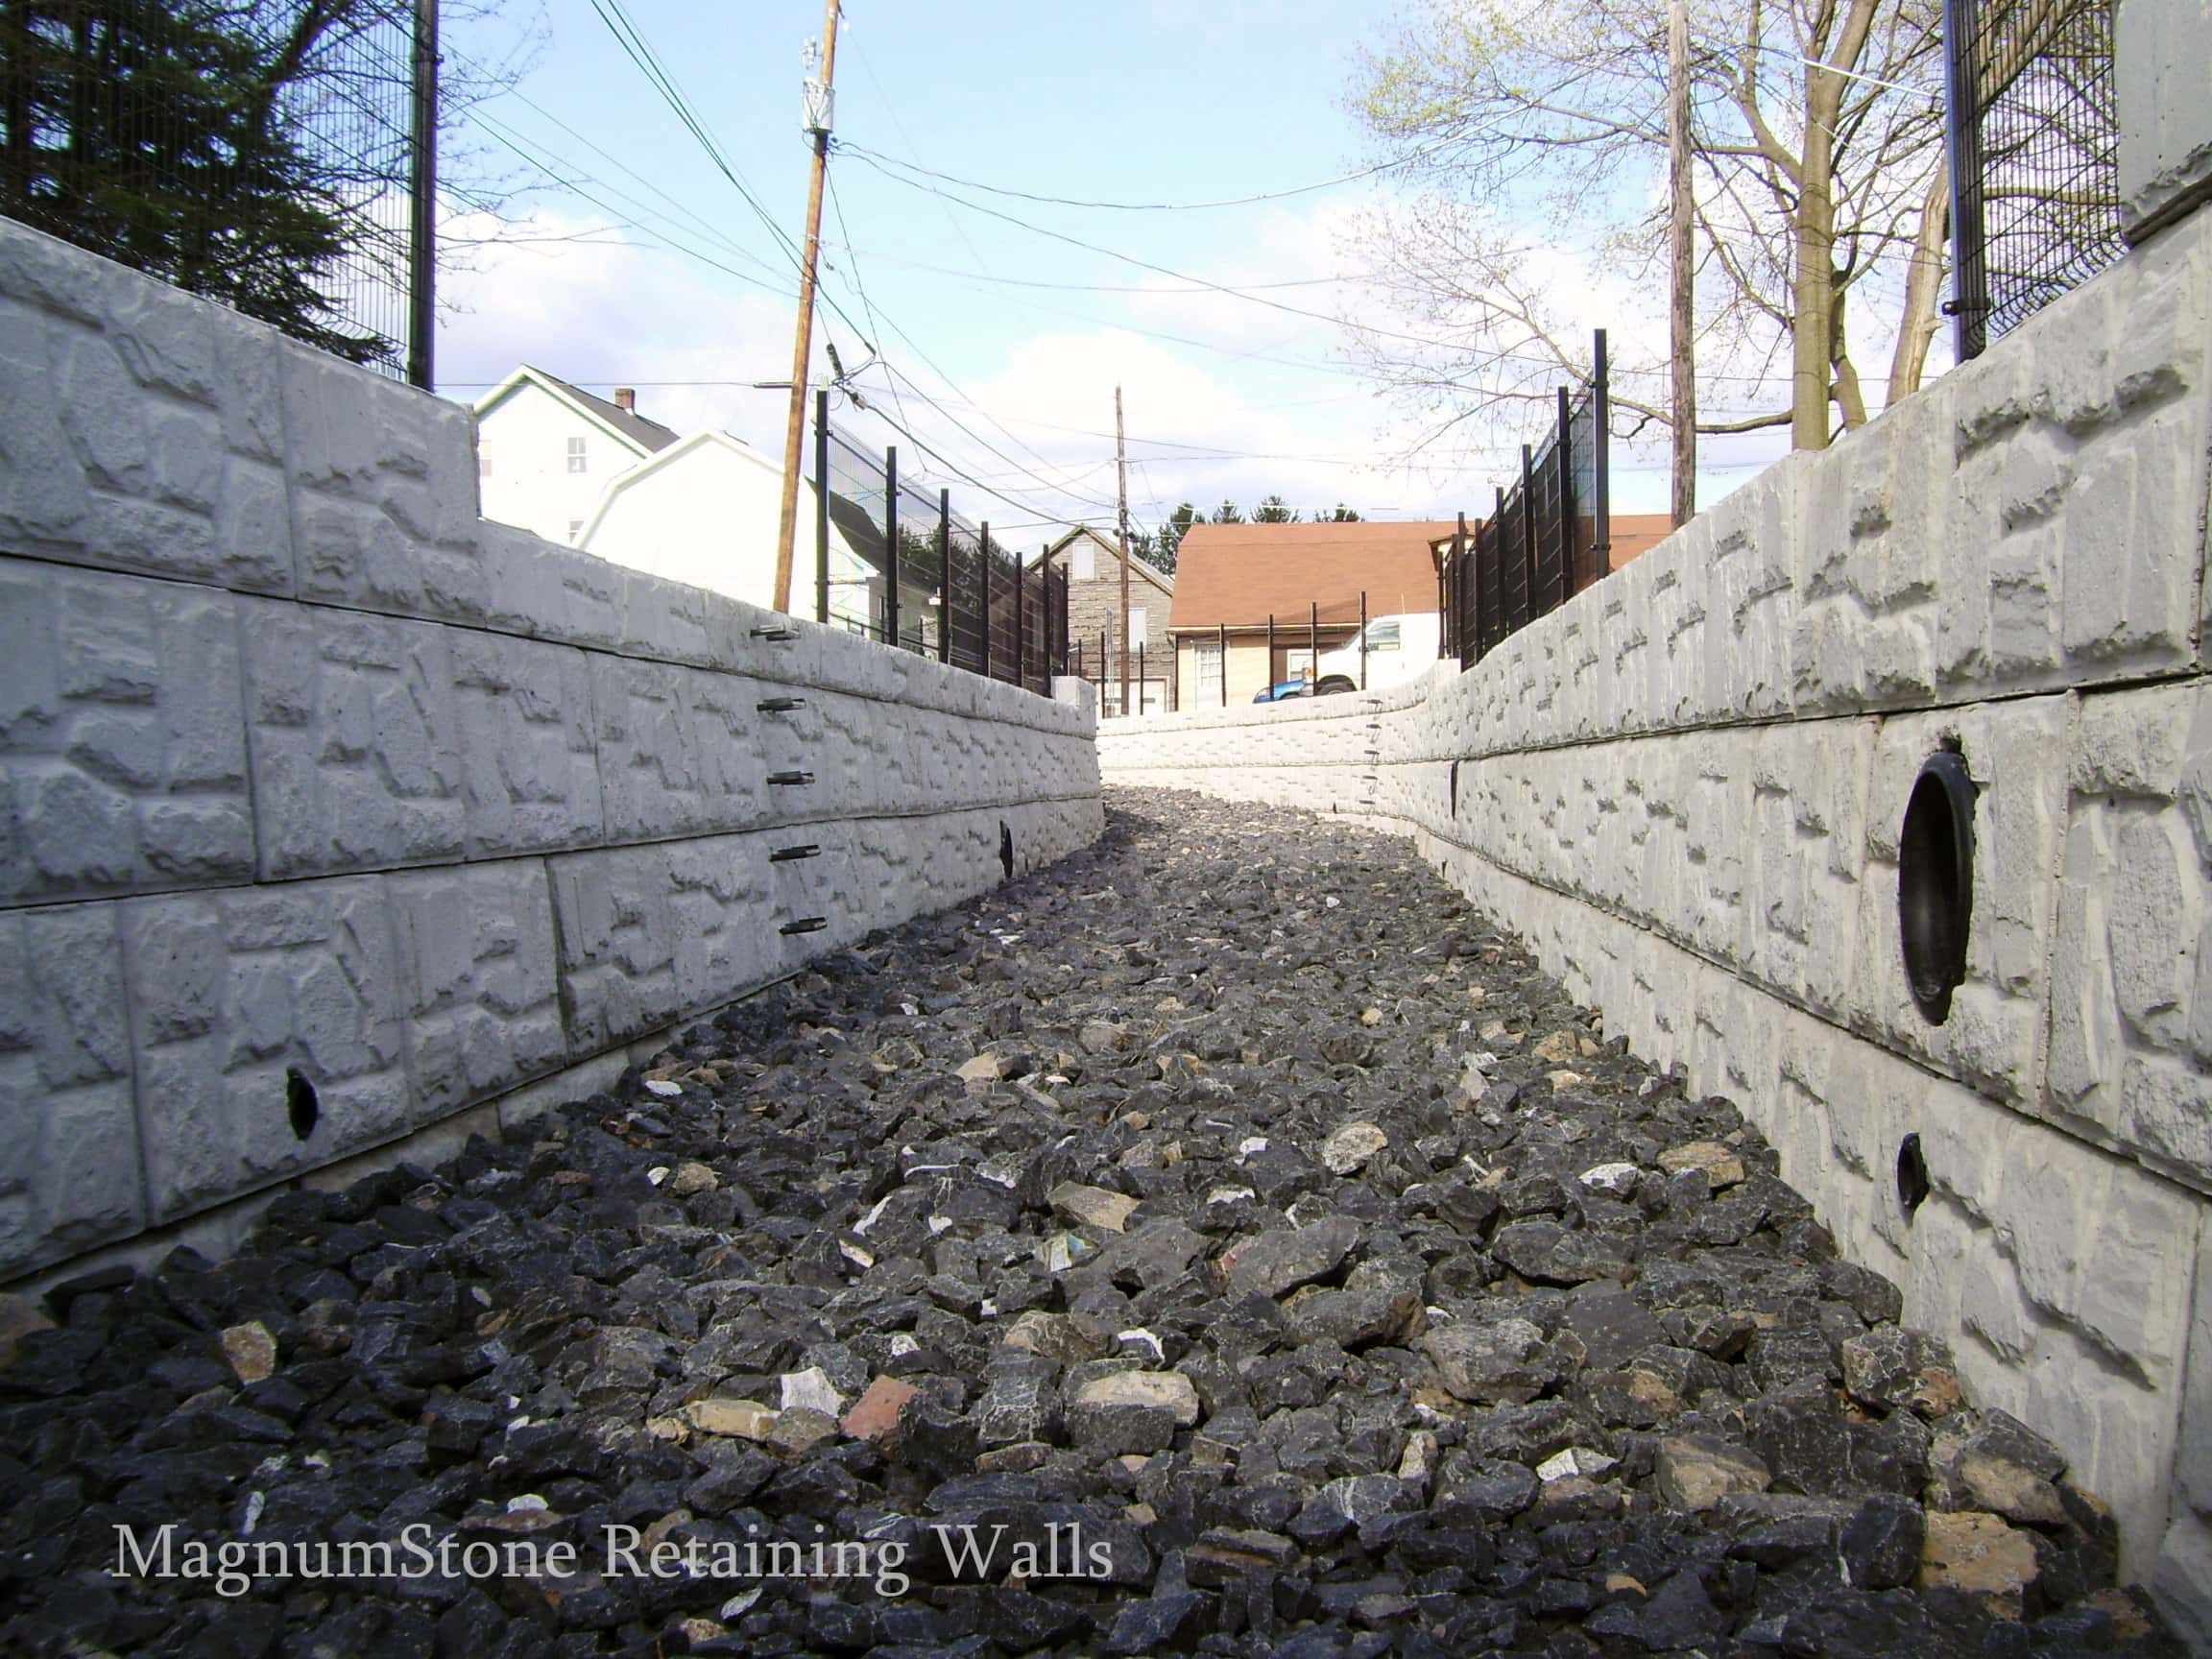 MagnumStone Retaining Walls Stormwater Management System